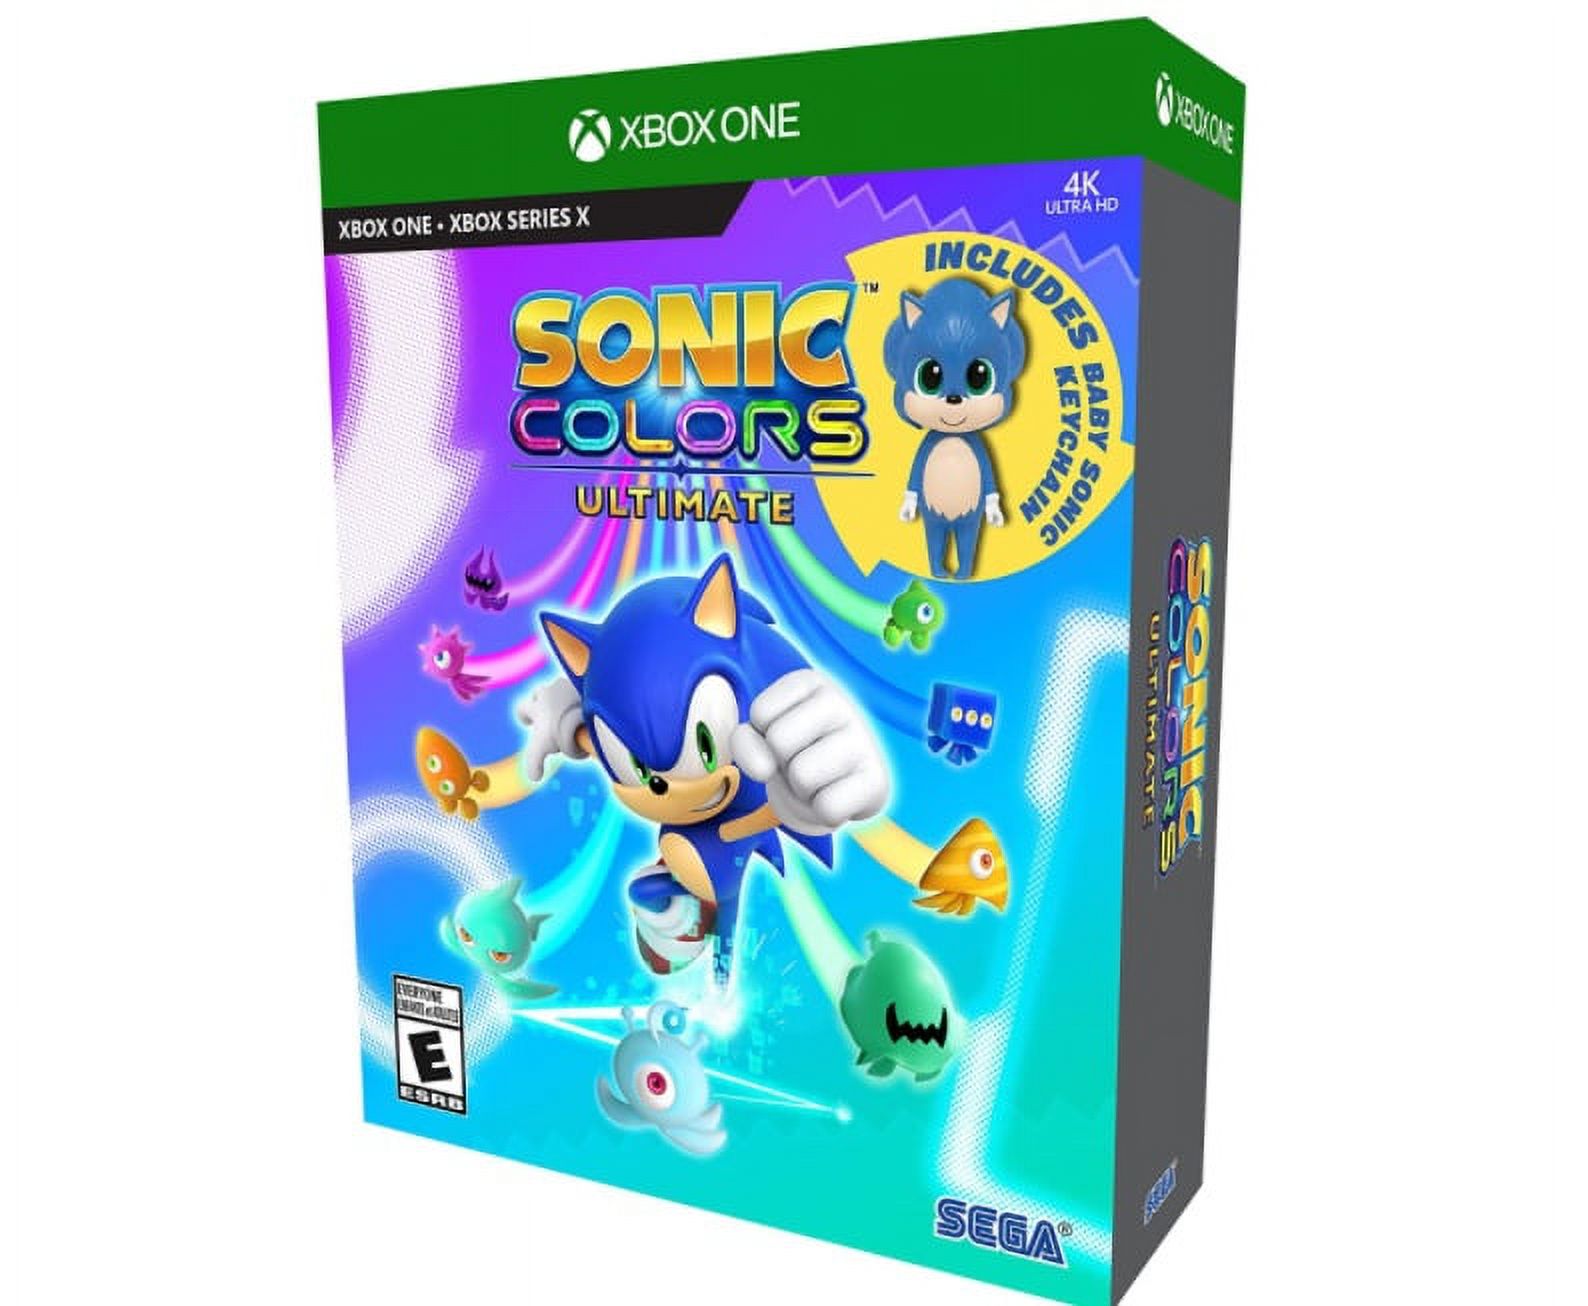 Sonic Colors Ultimate, Xbox One - image 3 of 3